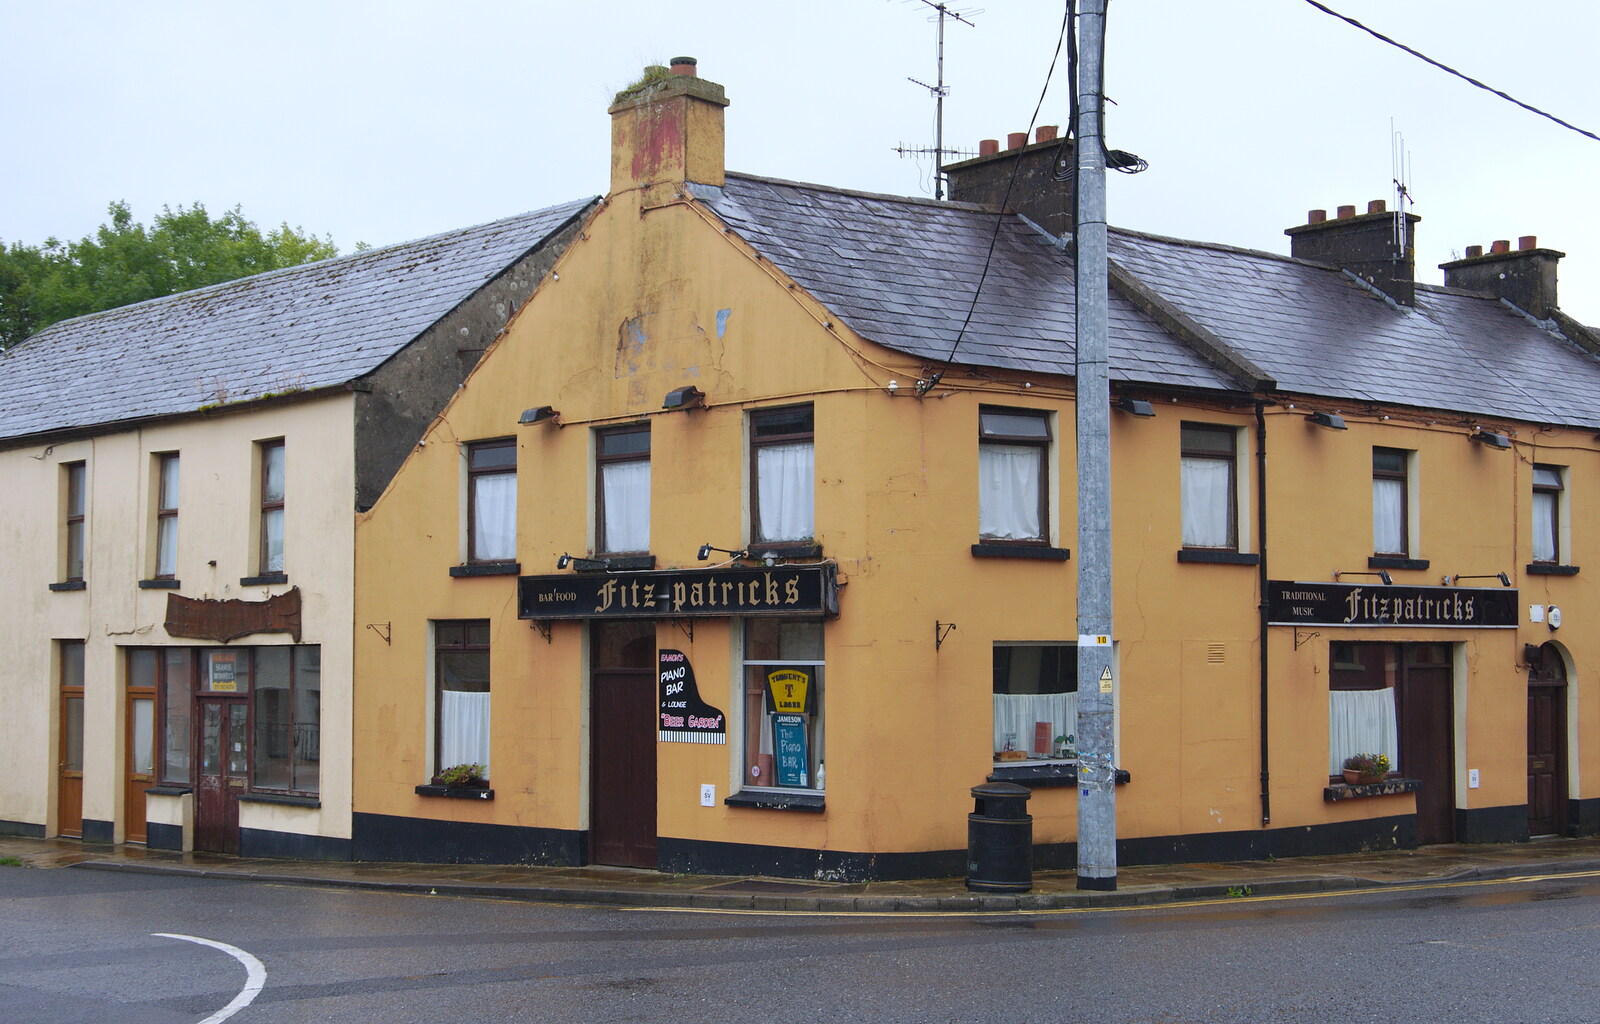 The semi-derelict Fitz-Patrick's in An Blaic from Travels in the Borderlands: An Blaic/Blacklion to Belcoo and back, Cavan and Fermanagh, Ireland - 22nd August 2019